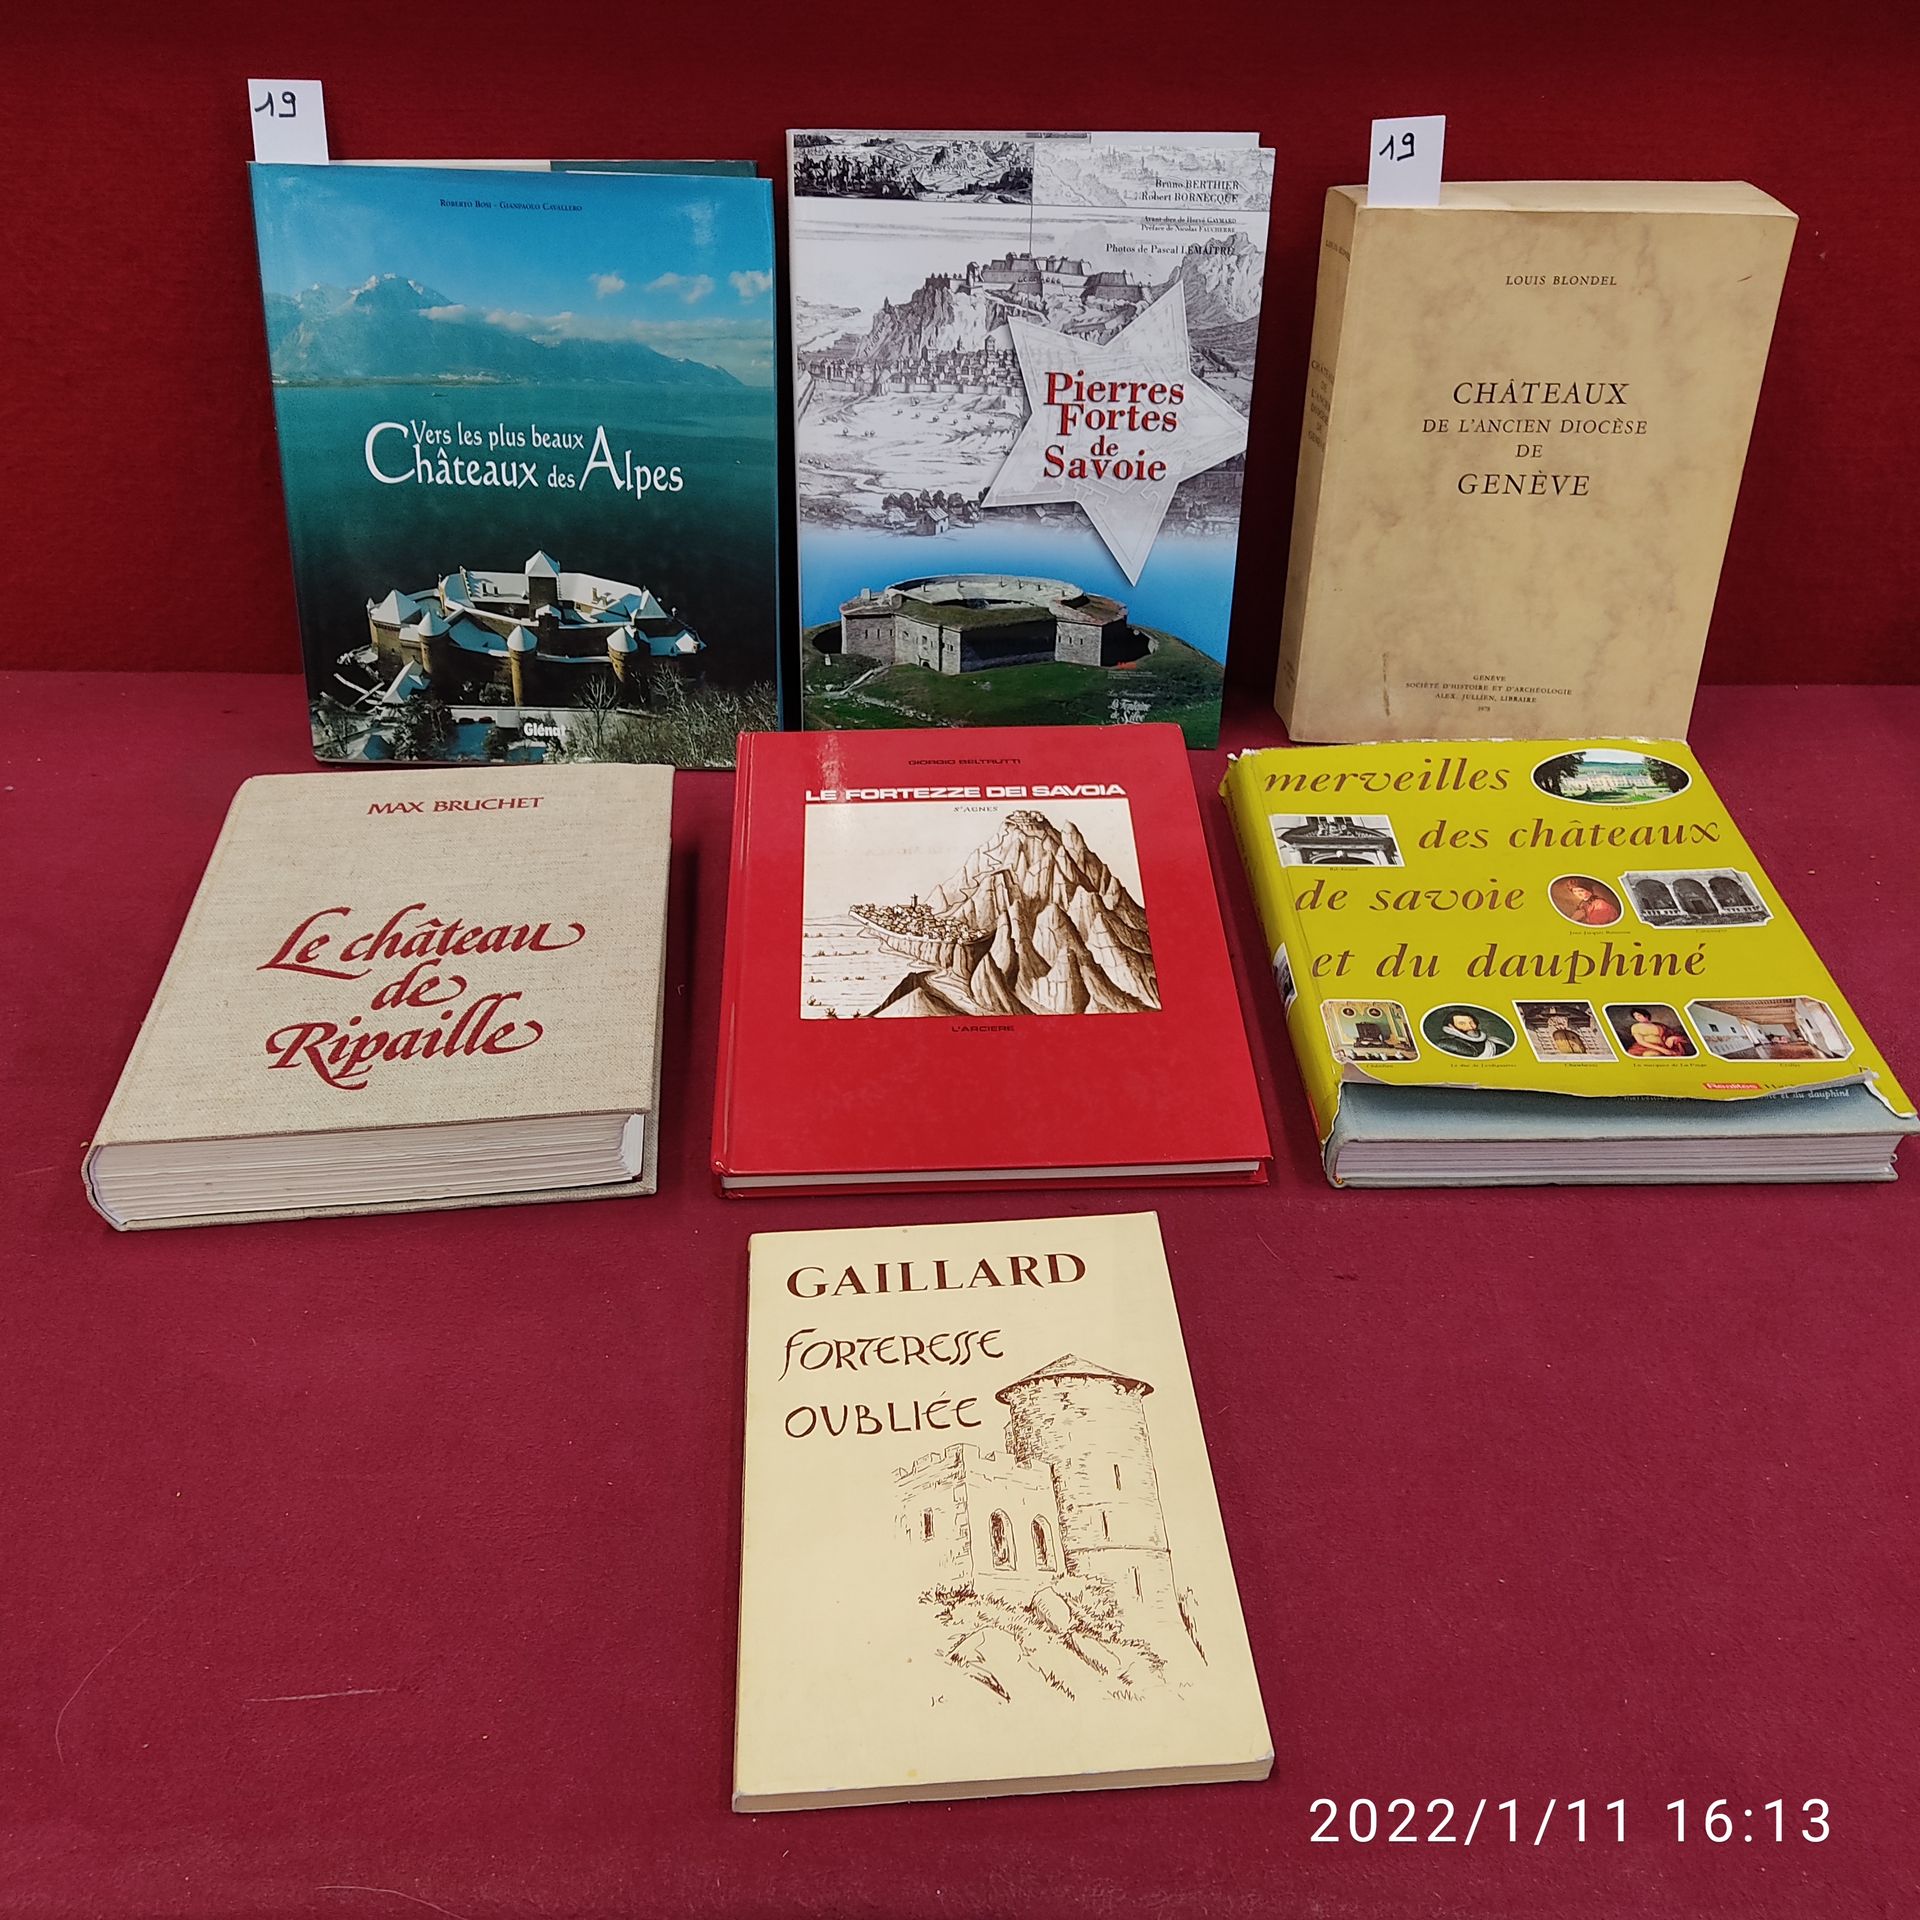 Château des Alpes set of 7 books on the castles of the Alps including: castles o&hellip;